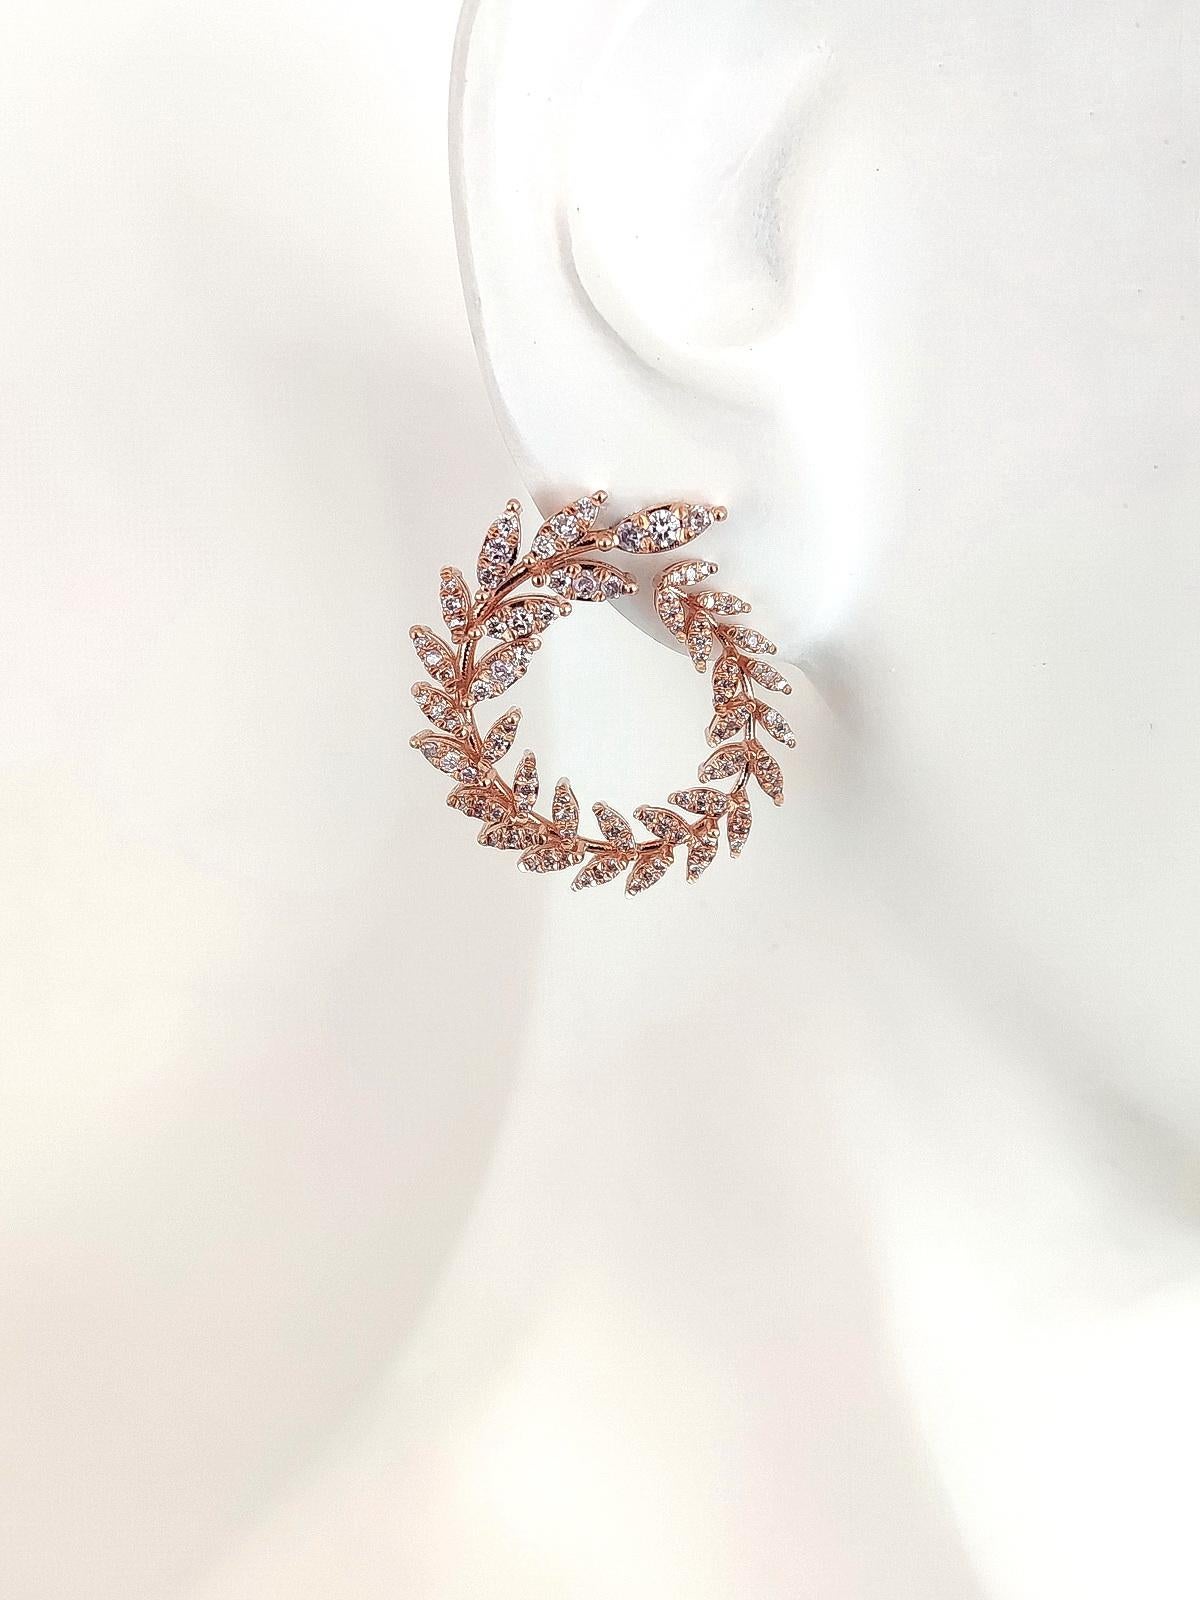 FOR U.S. BUYERS NO VAT 

204 sparkling round brilliant pink diamonds, totaling 1.58 carats, are set in 14kt pink gold in such a way that their unique combination creates a chain of leaves-like design shaped as circles. The earrings make a very